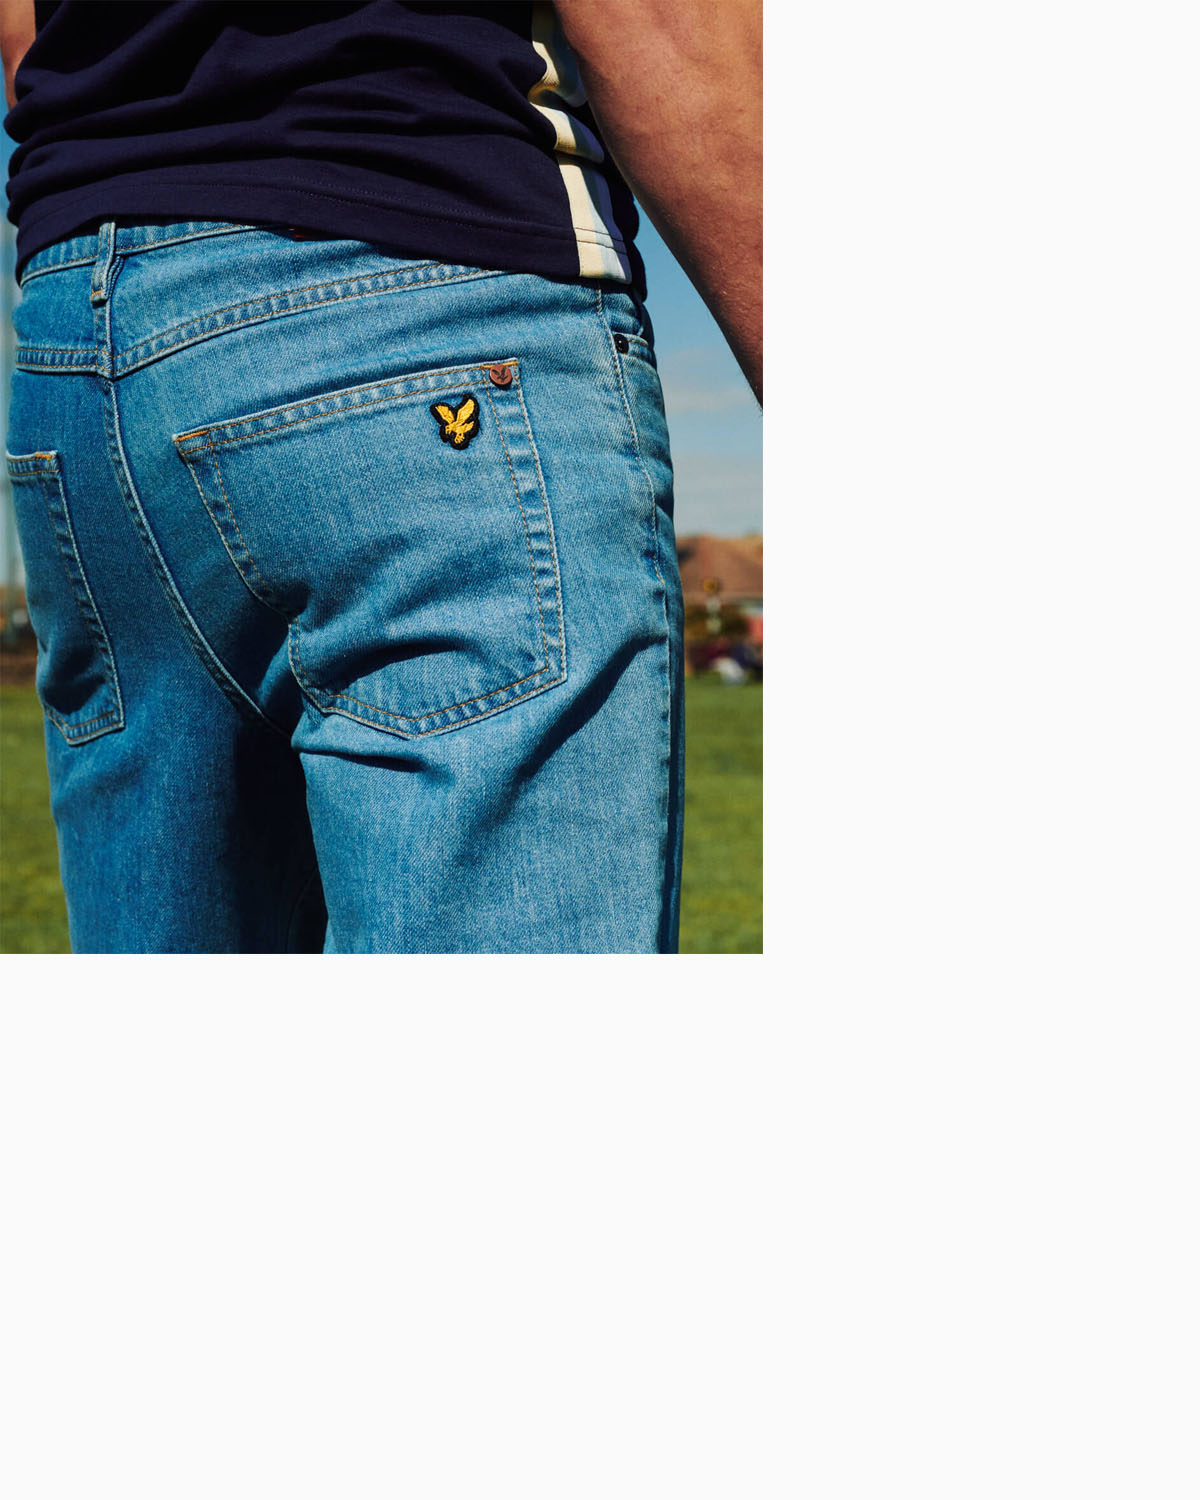 Lyle and Scott blue jean and rear pocket badge detail